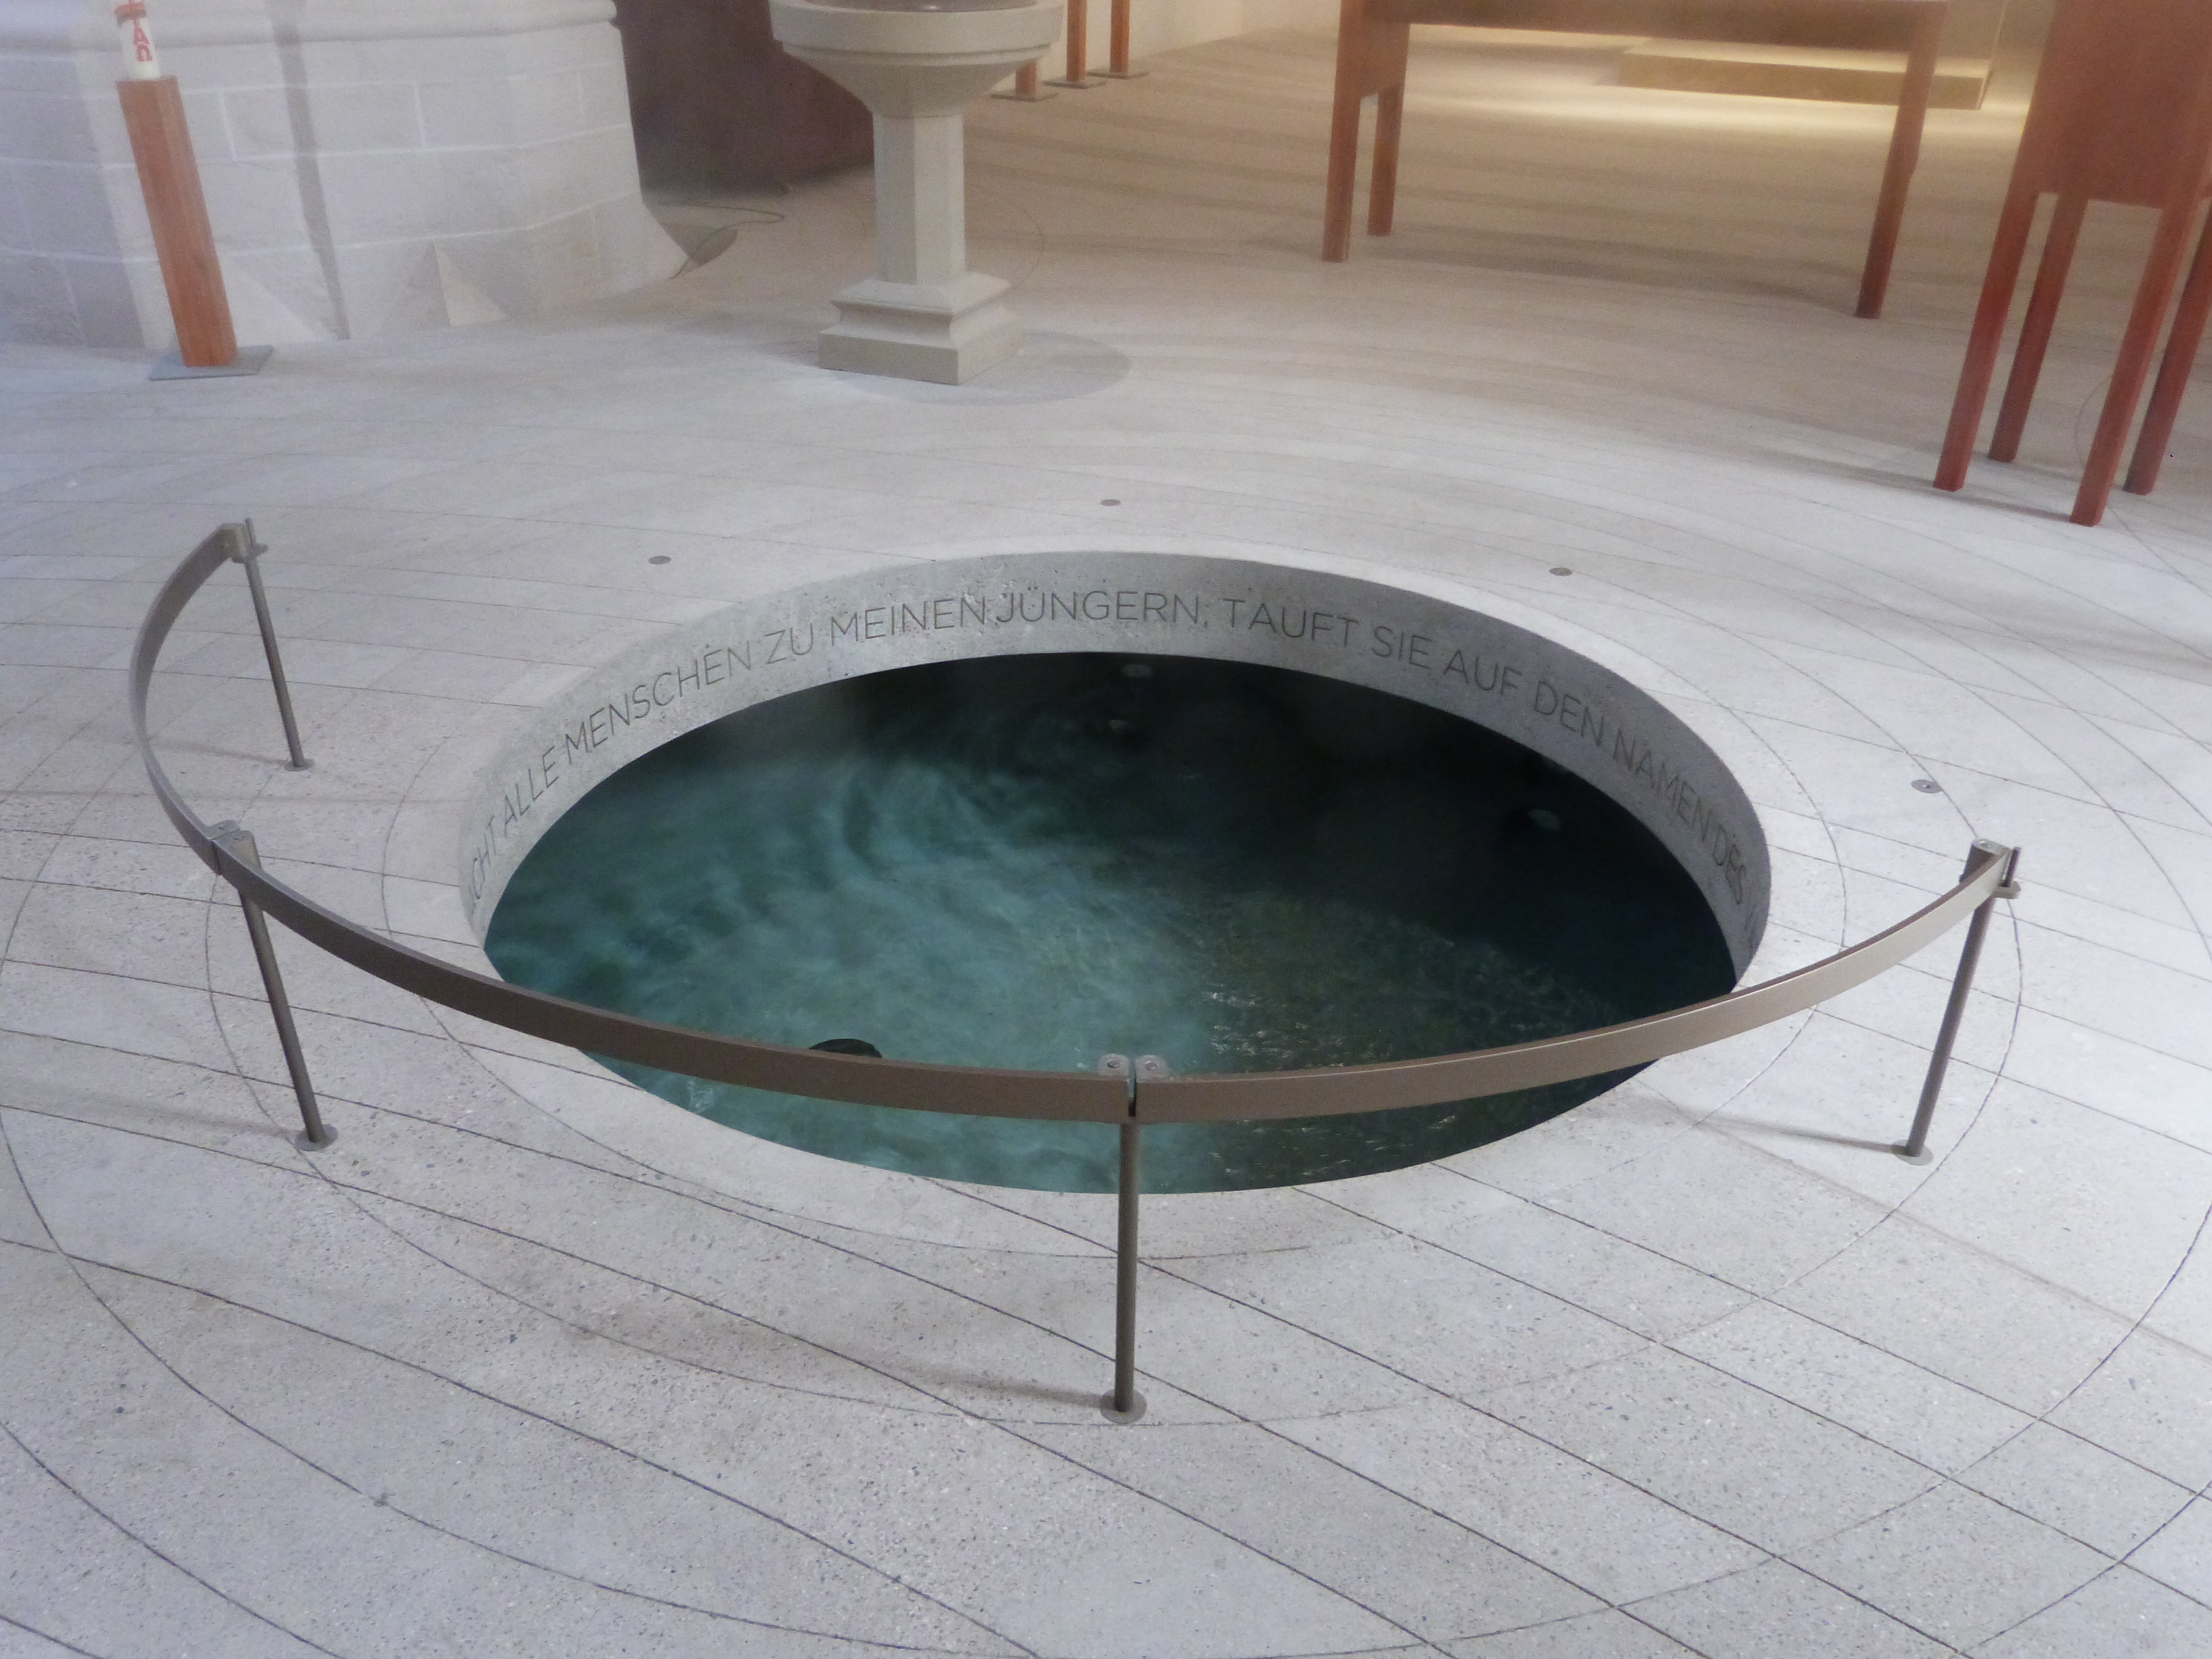 The new font in the church in which Martin Luther was baptised